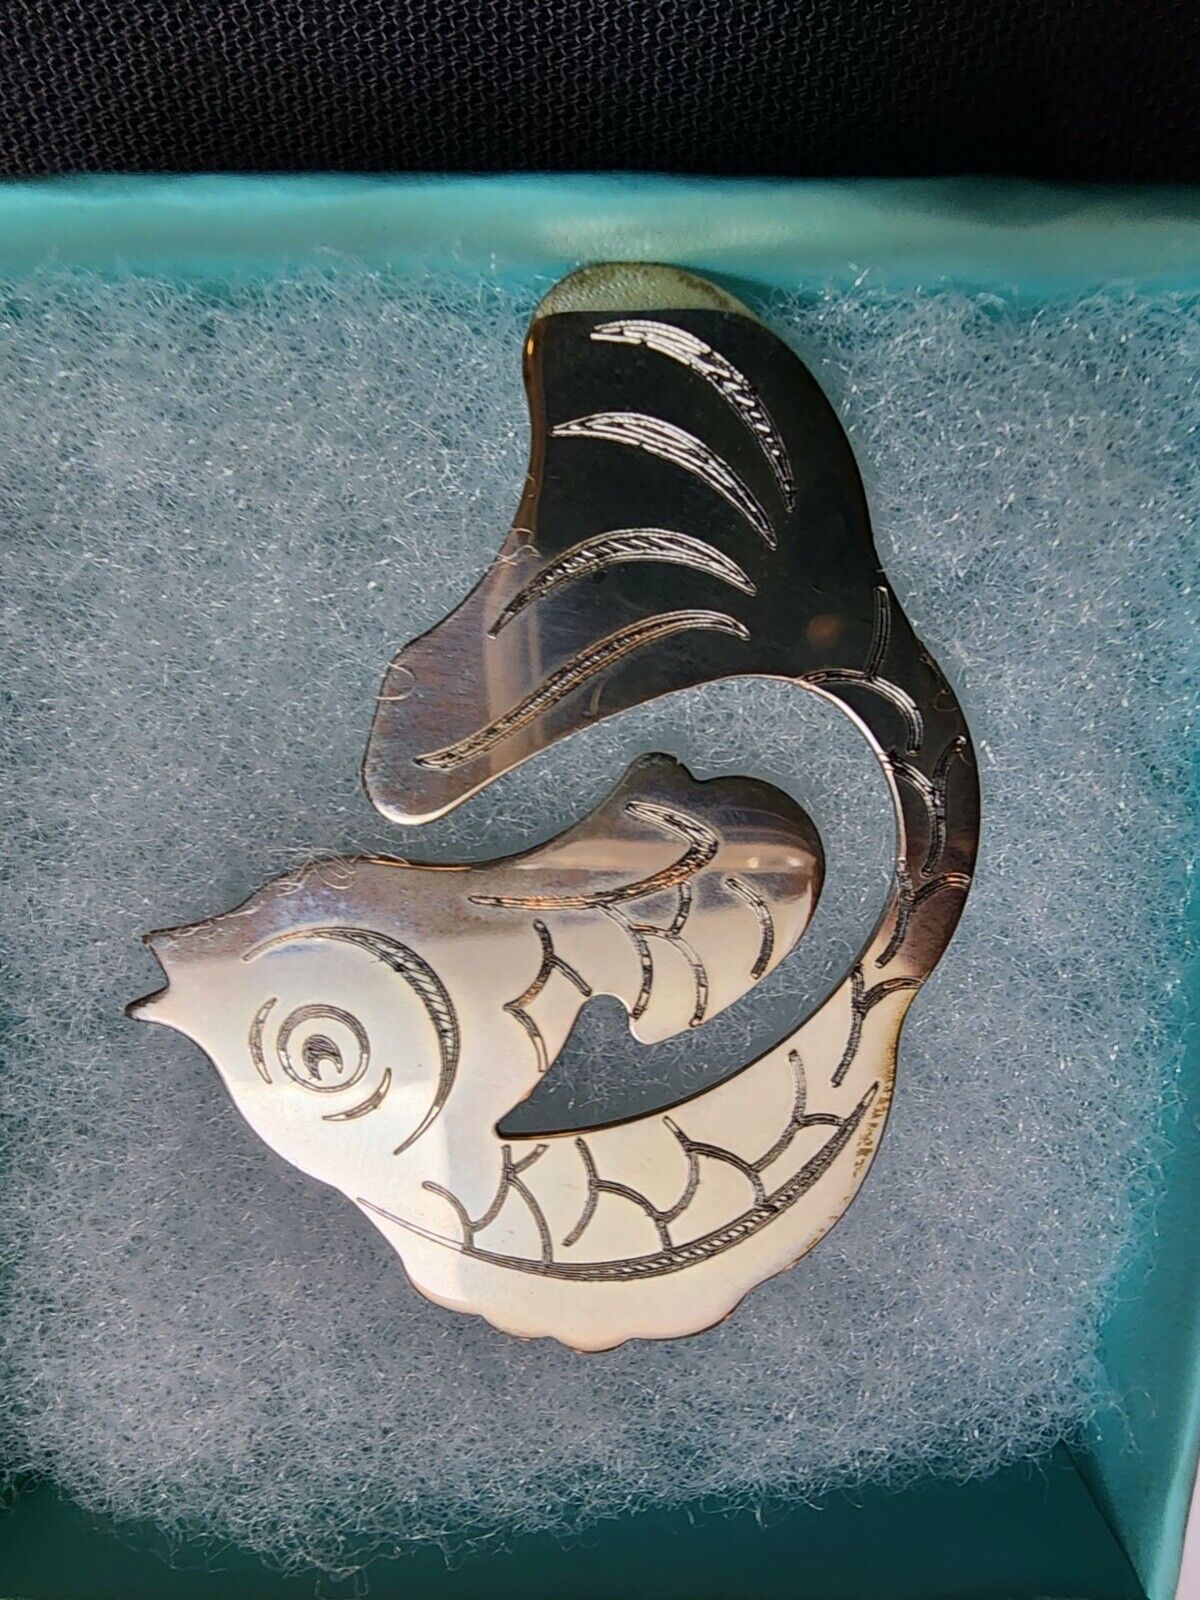 Tiffany co. sterling Silver Fish book mark .Never used .It' in a original pouch.